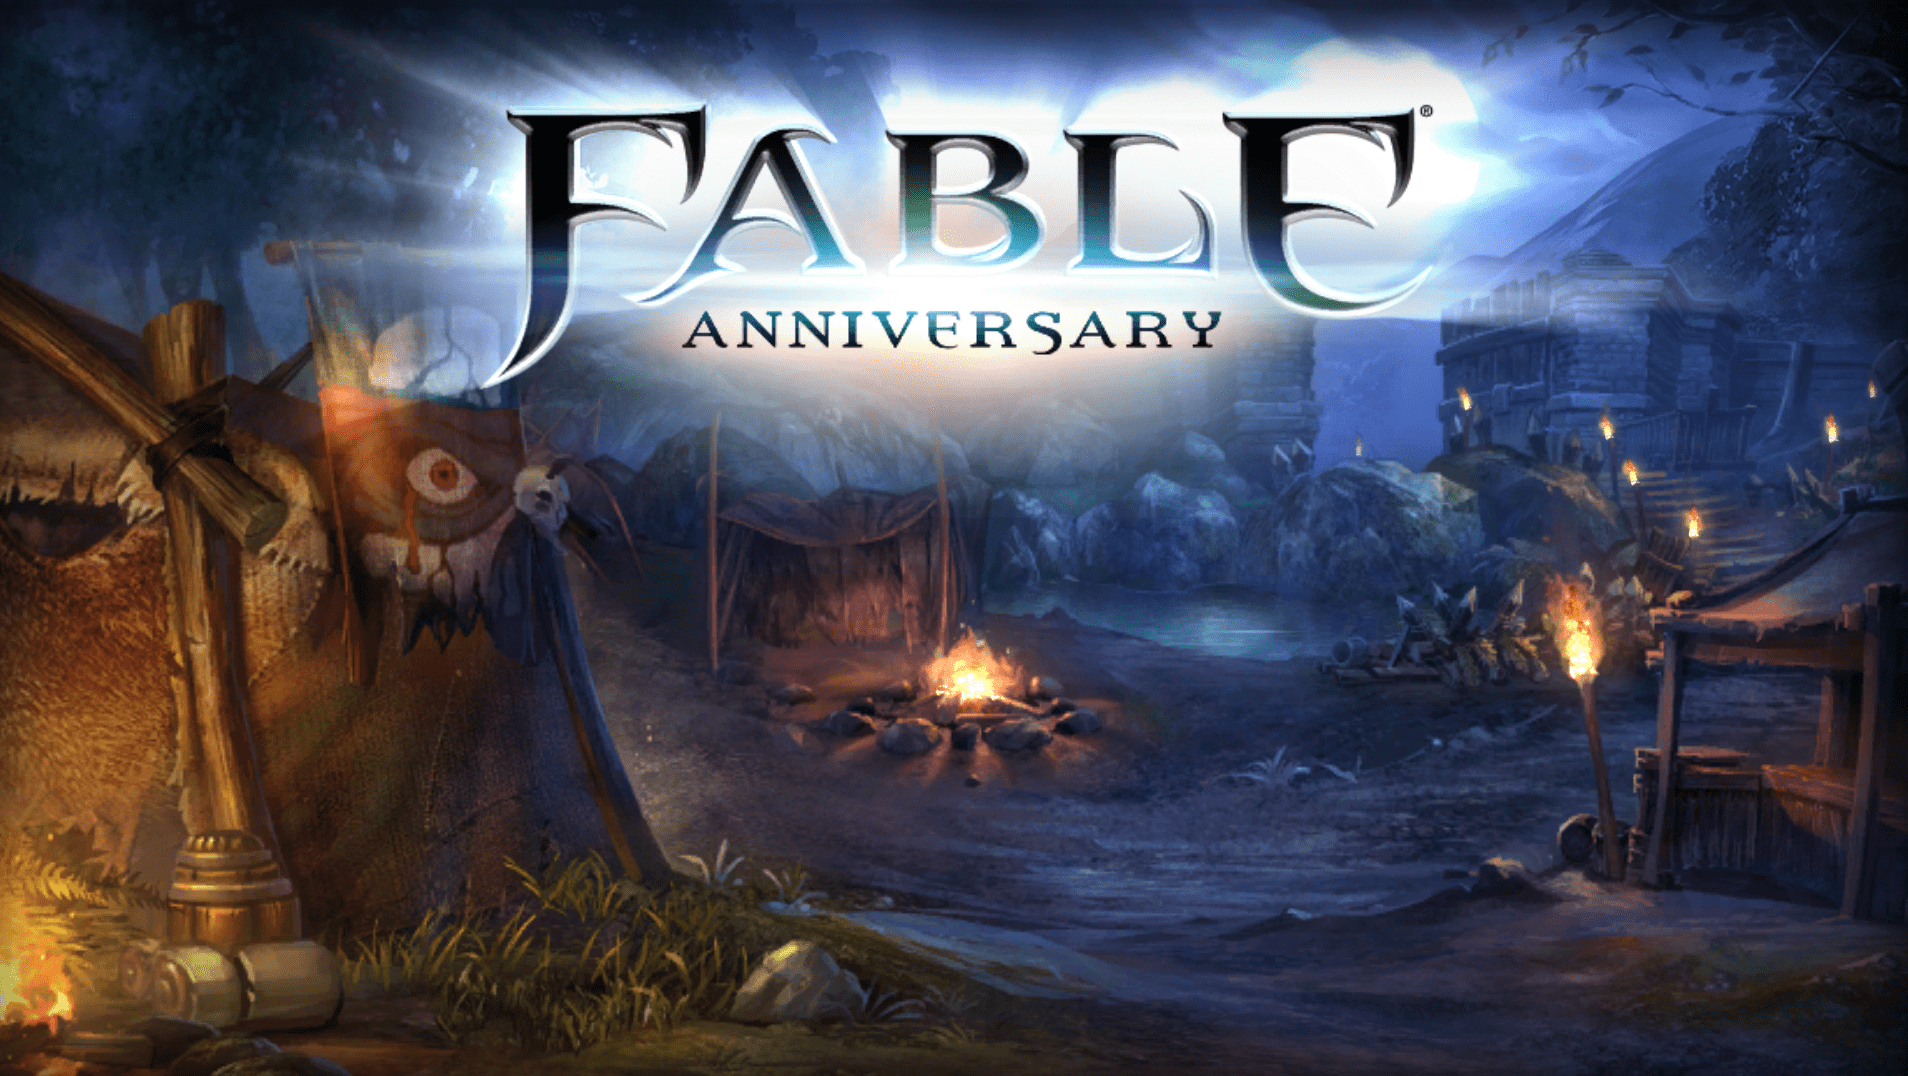 Play Fable Anniversary For PC! One Of My Favourite Games!